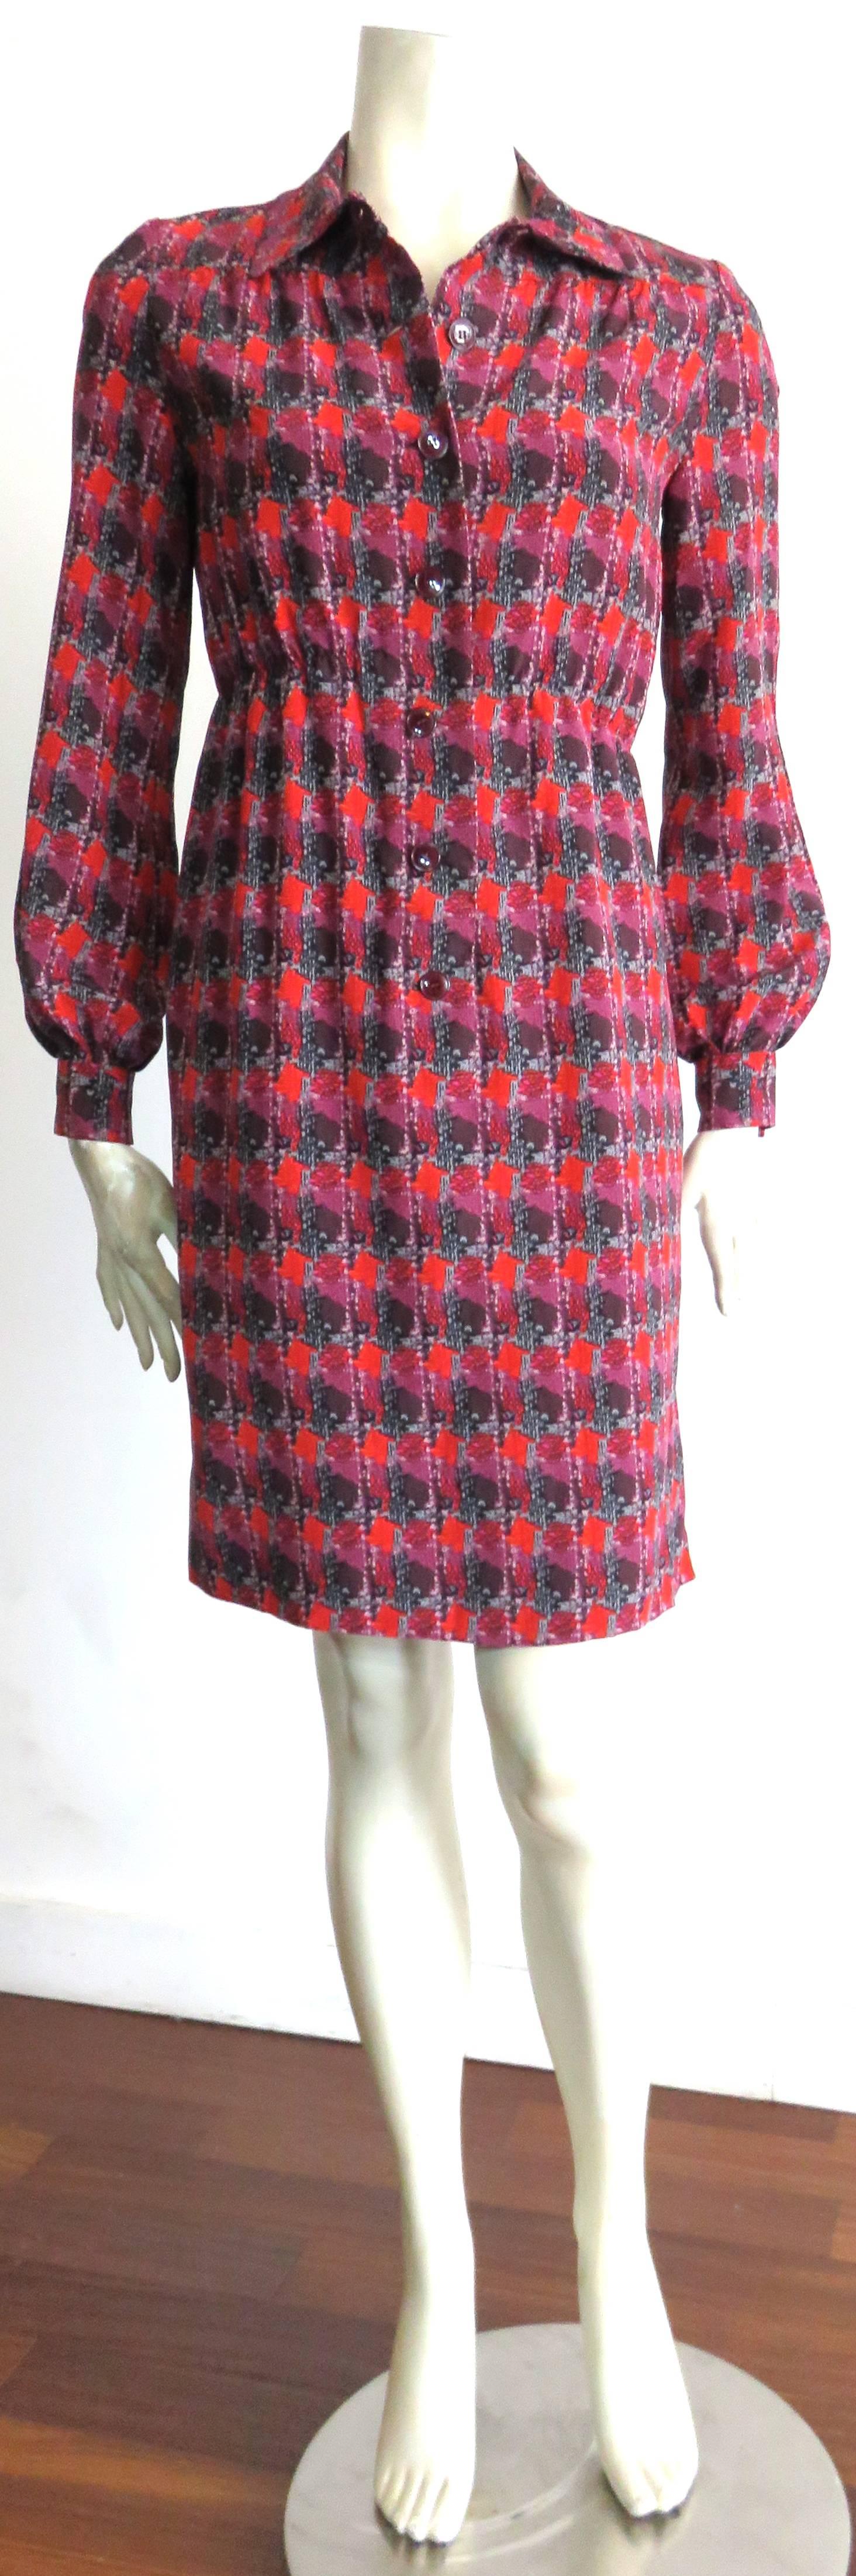 Excellent condition, 1970's YVES SAINT LAURENT Printed silk dress in vibrant shades of red, burgundy, night blue, and light gray.  

Button front placket with elasticated waist-line.

Fully lined.

*MEASUREMENTS*

There is no size label